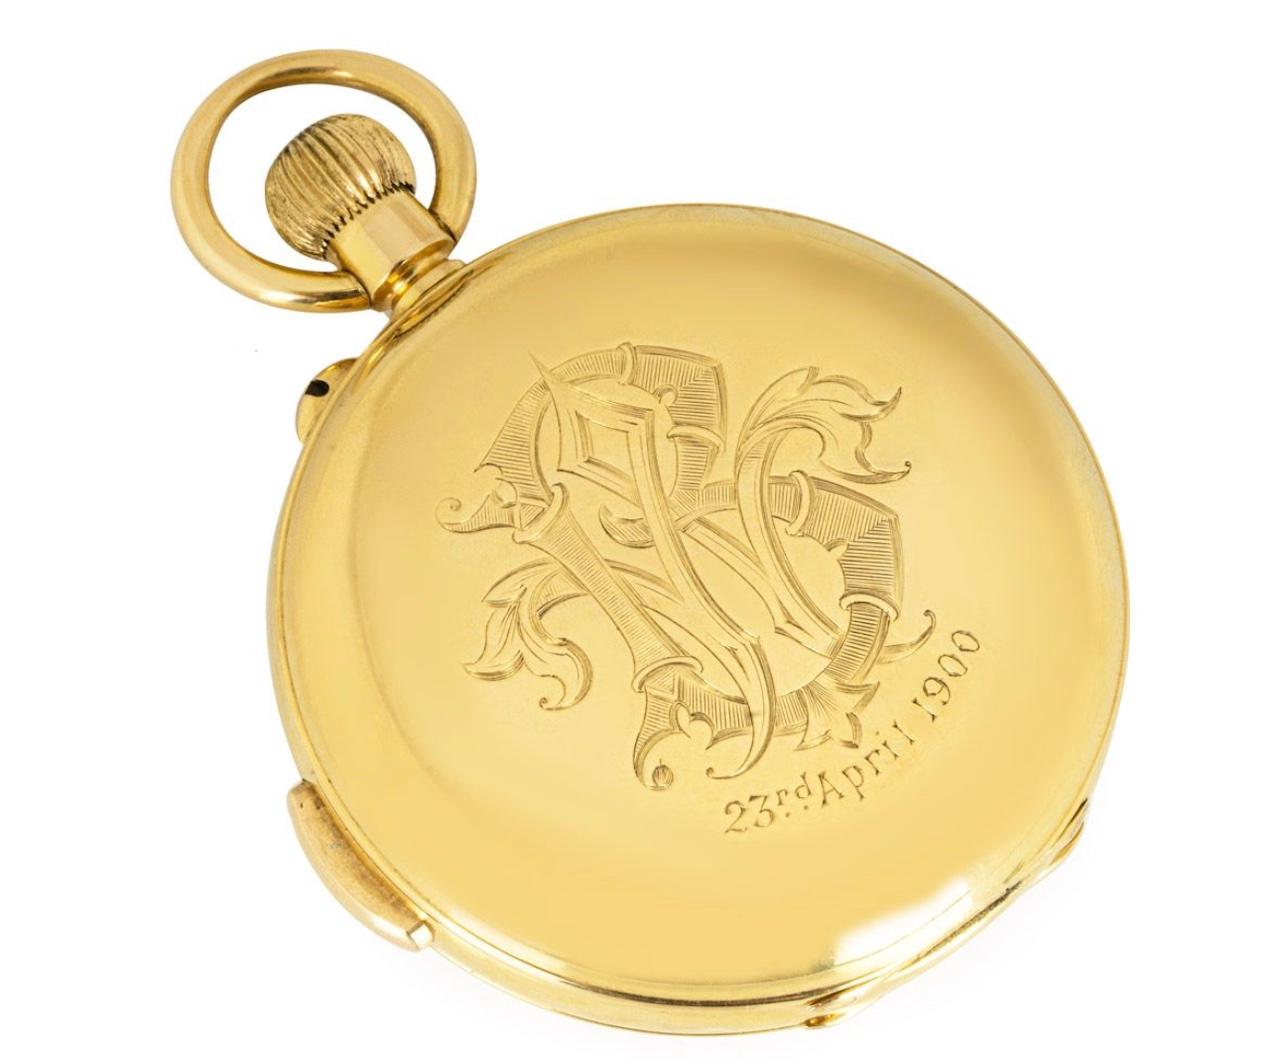 Baume Swiss Full Hunter Keyless Lever Minute Repeater Pocket Watch, C1890s In Excellent Condition For Sale In London, GB